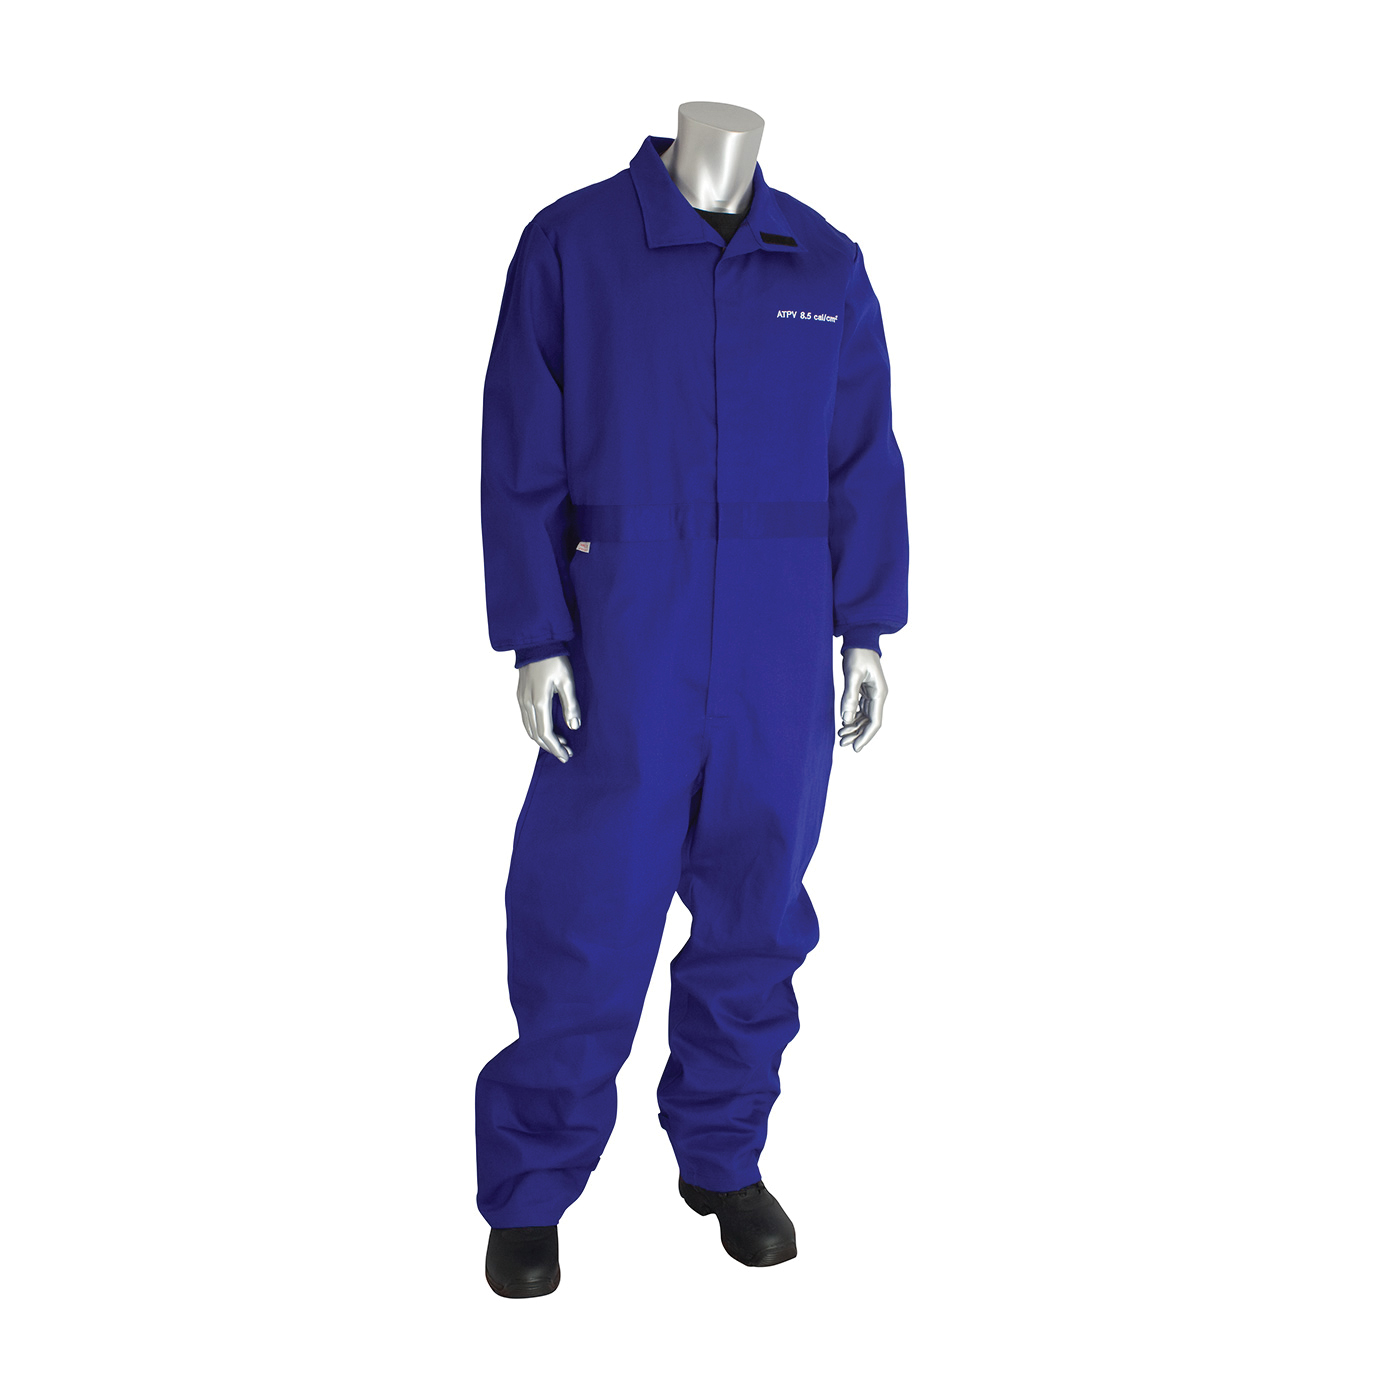 PIP® 9100-2120D/4X Flame Resistant Coverall With Vented Back, 4XL, Royal Blue, 90% Cotton/10% Nylon/FR Twill Weave, 60 to 62 in Chest, 32 in L Inseam